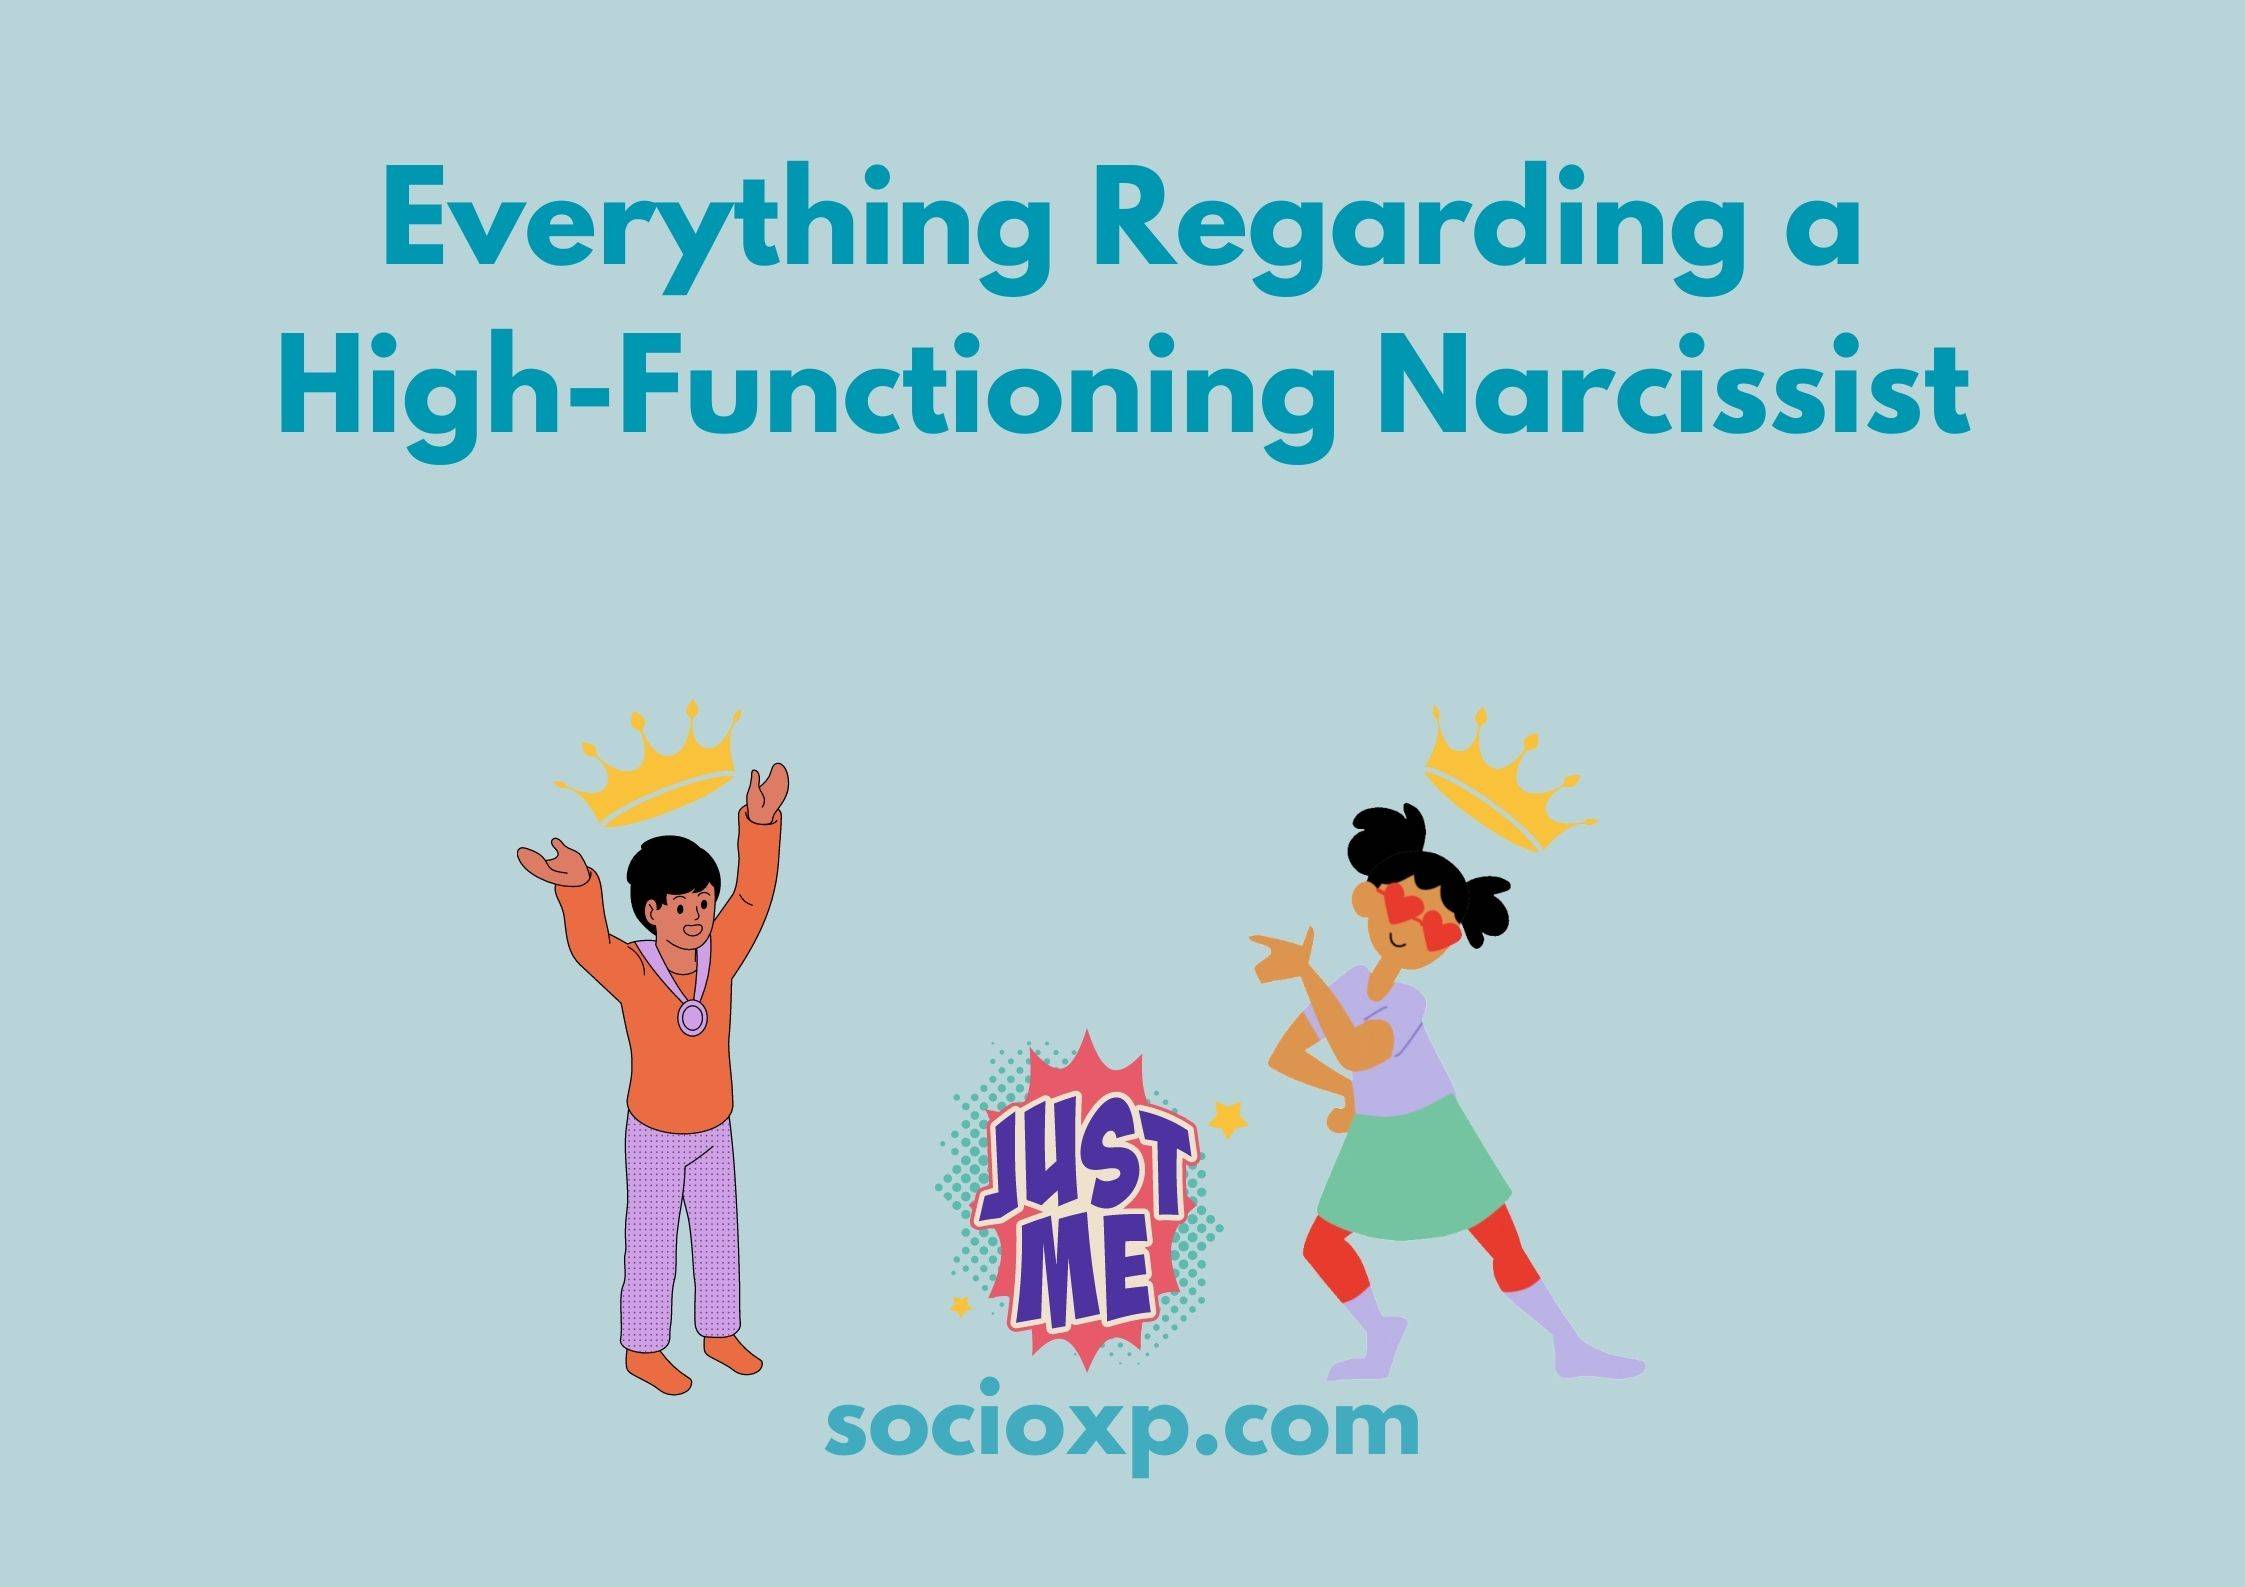 Everything Regarding a High-Functioning Narcissist